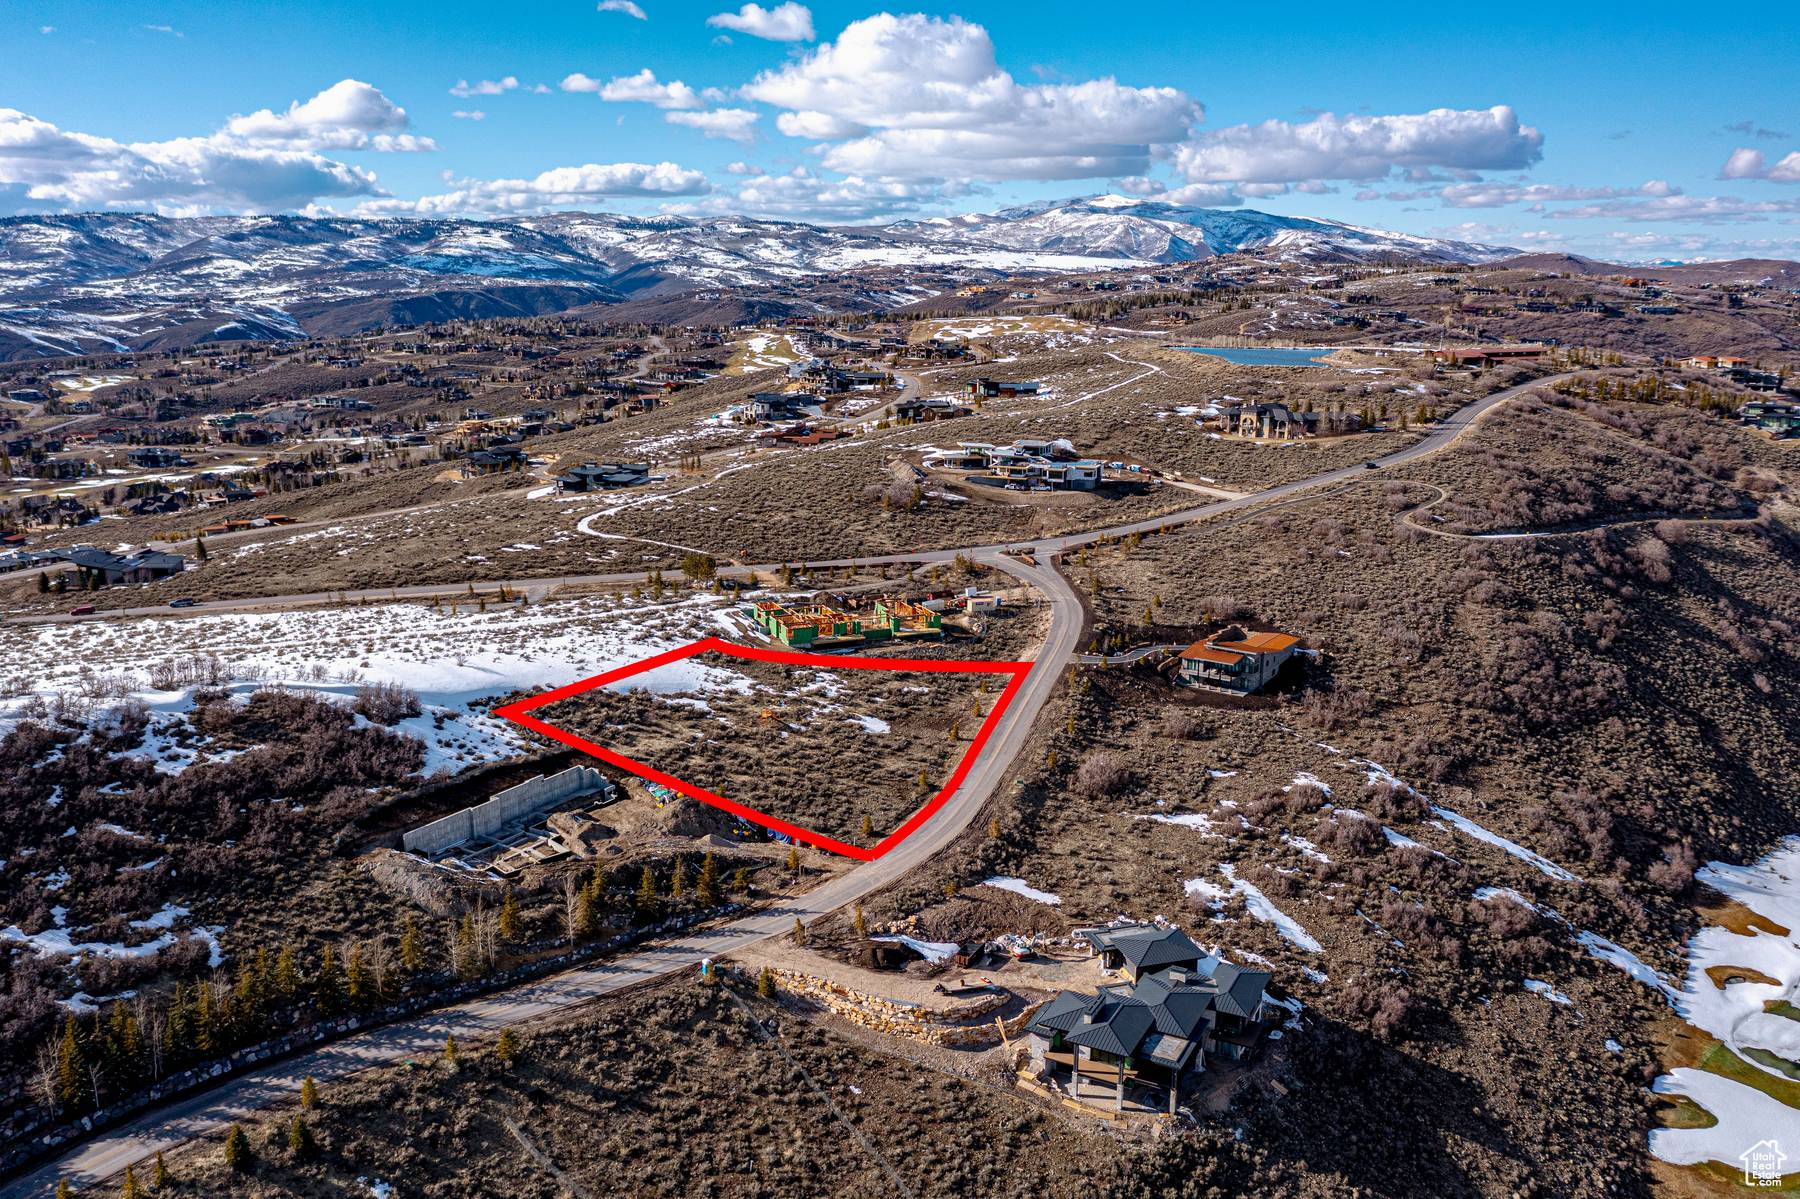 7113 PAINTED VALLEY #53, Park City, Utah 84098, ,Land,For sale,PAINTED VALLEY,1991394